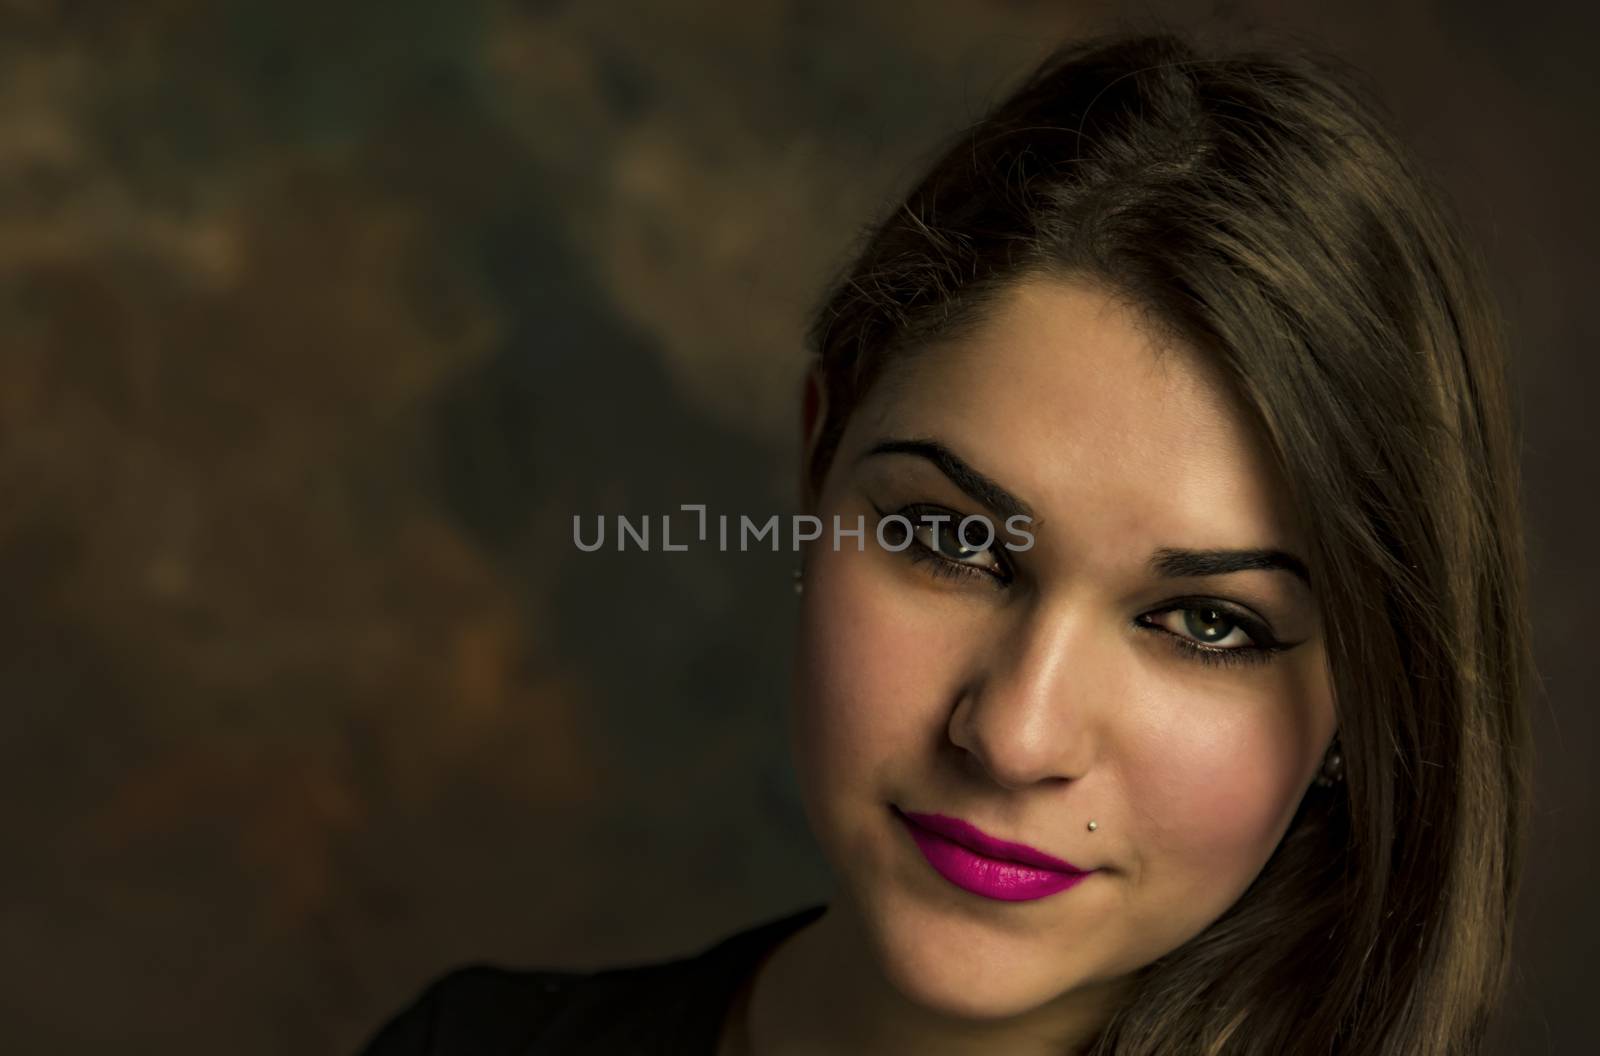 beautiful young woman in a close-up portrait